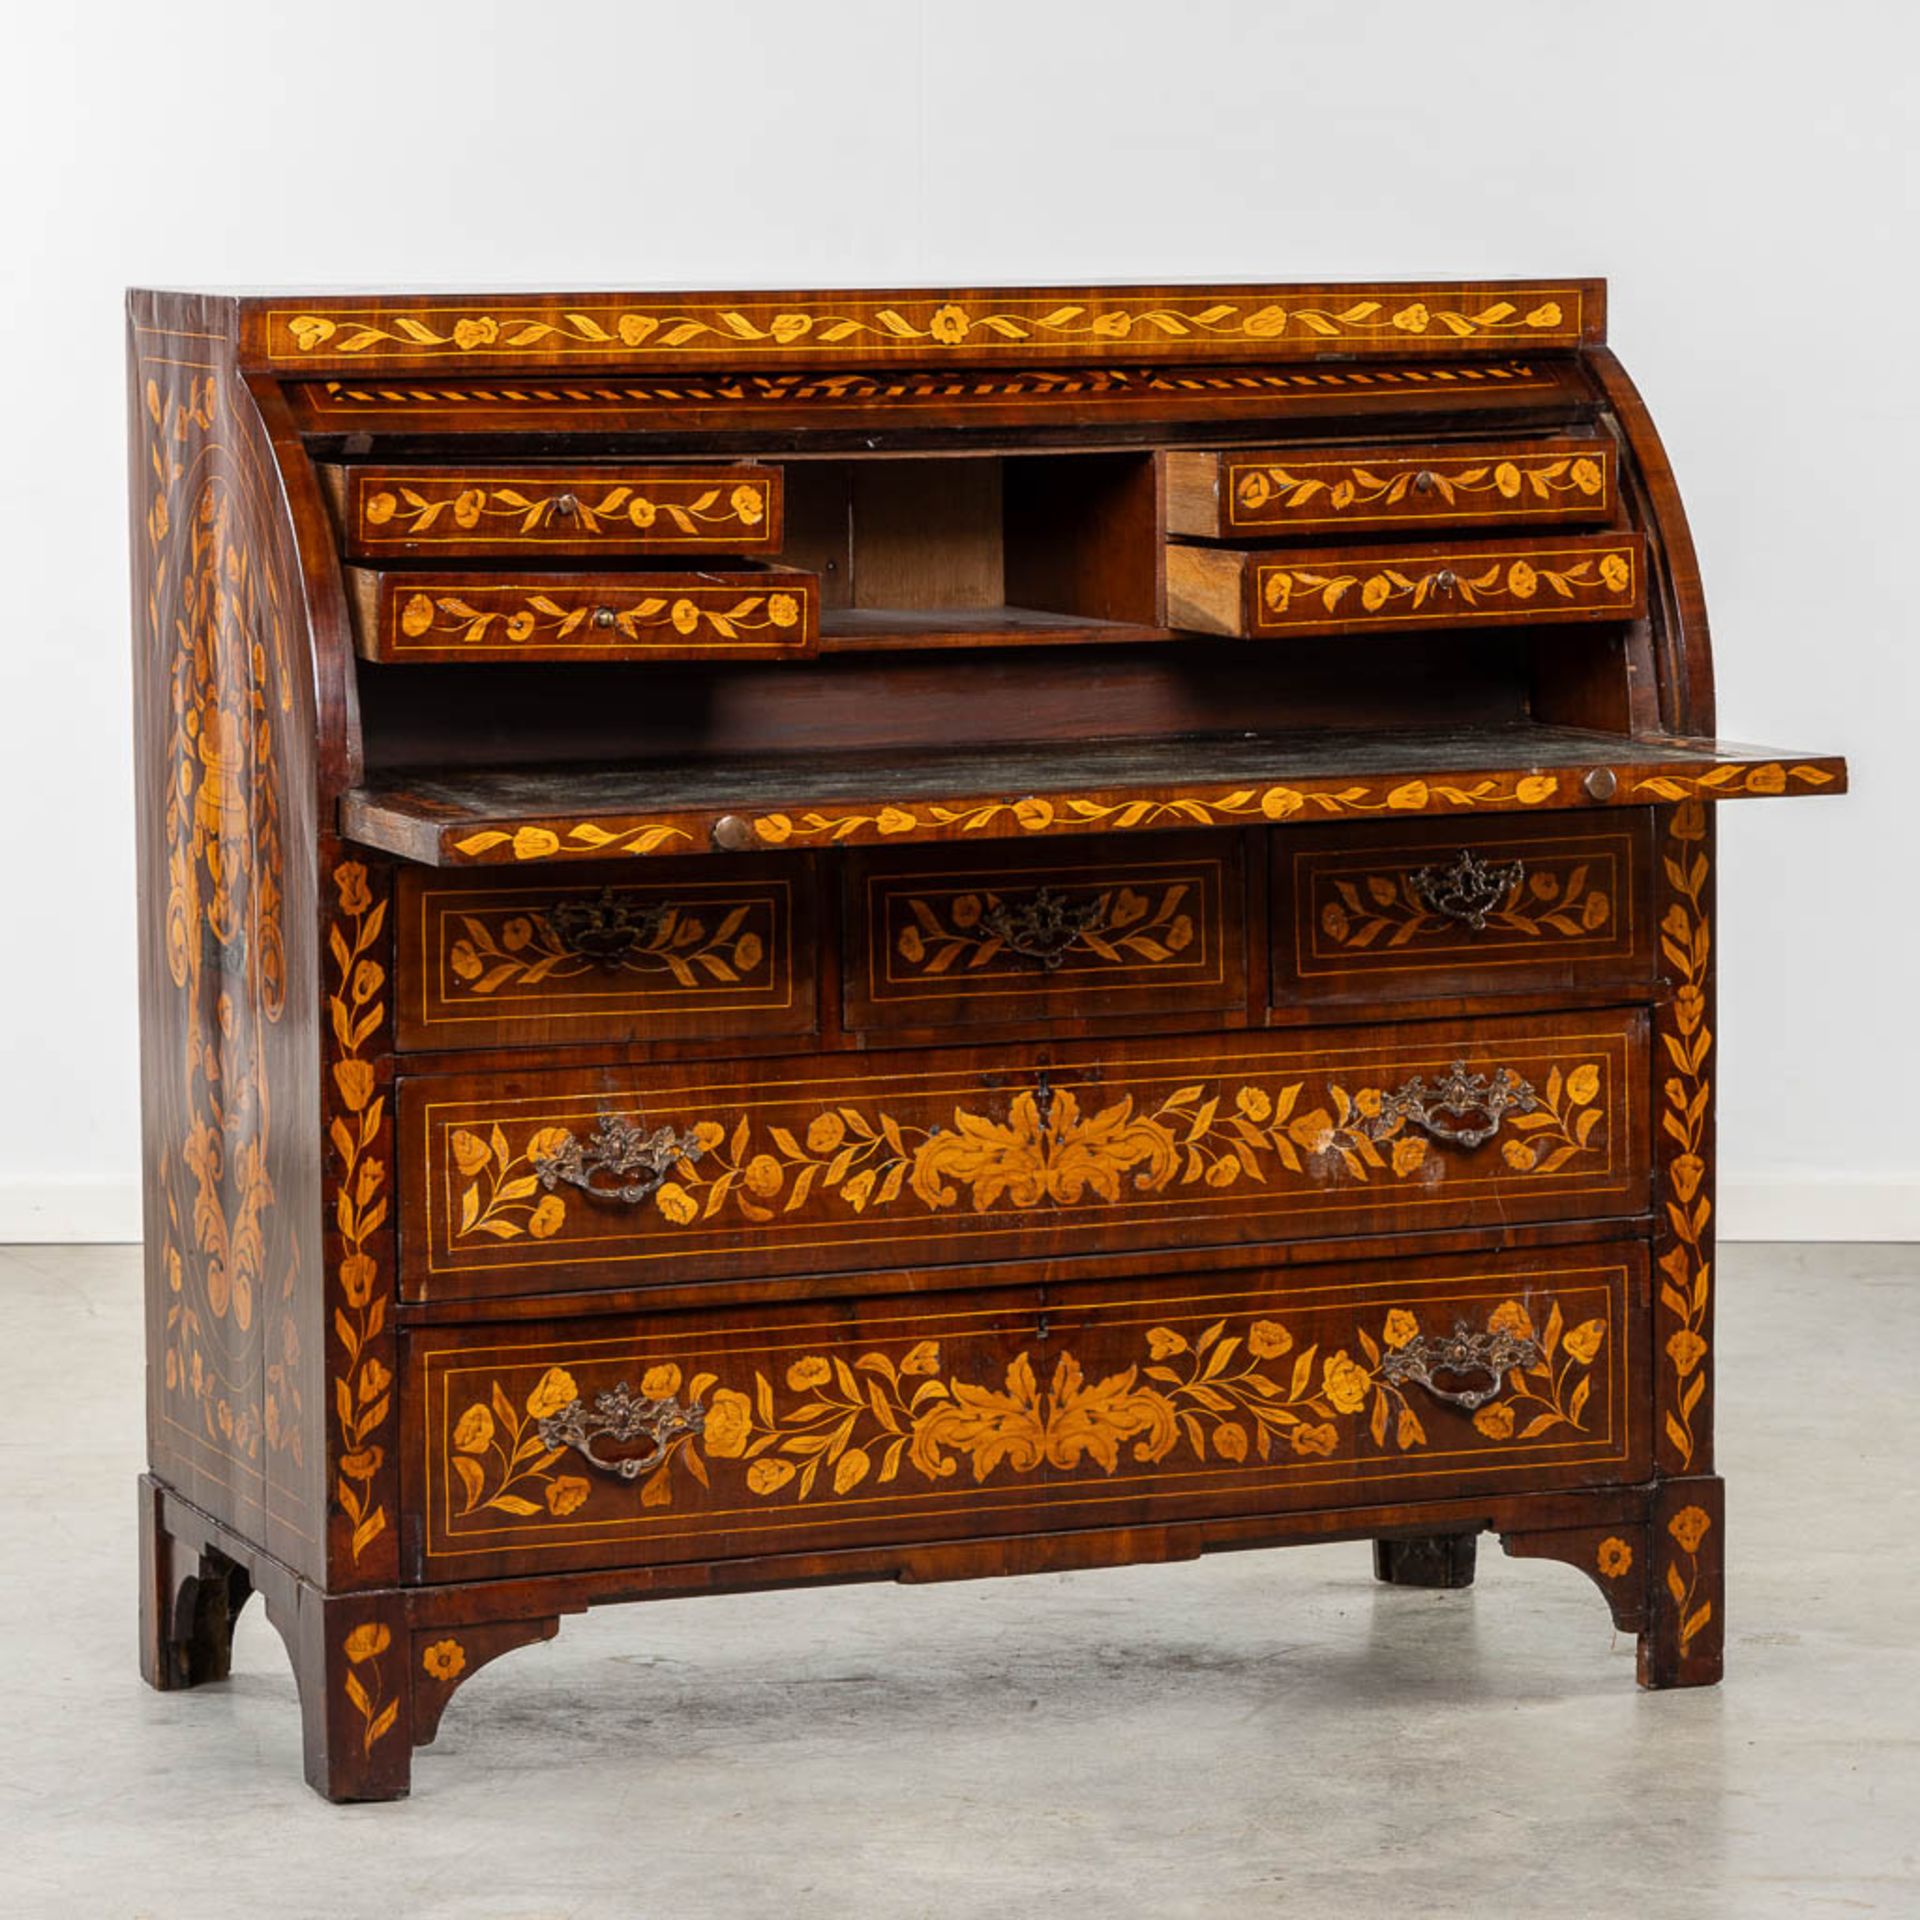 A fine marquetry inlay secretaire cabinet, The Netherlands, 18th C. (L:51 x W:112 x H:108 cm) - Image 4 of 20